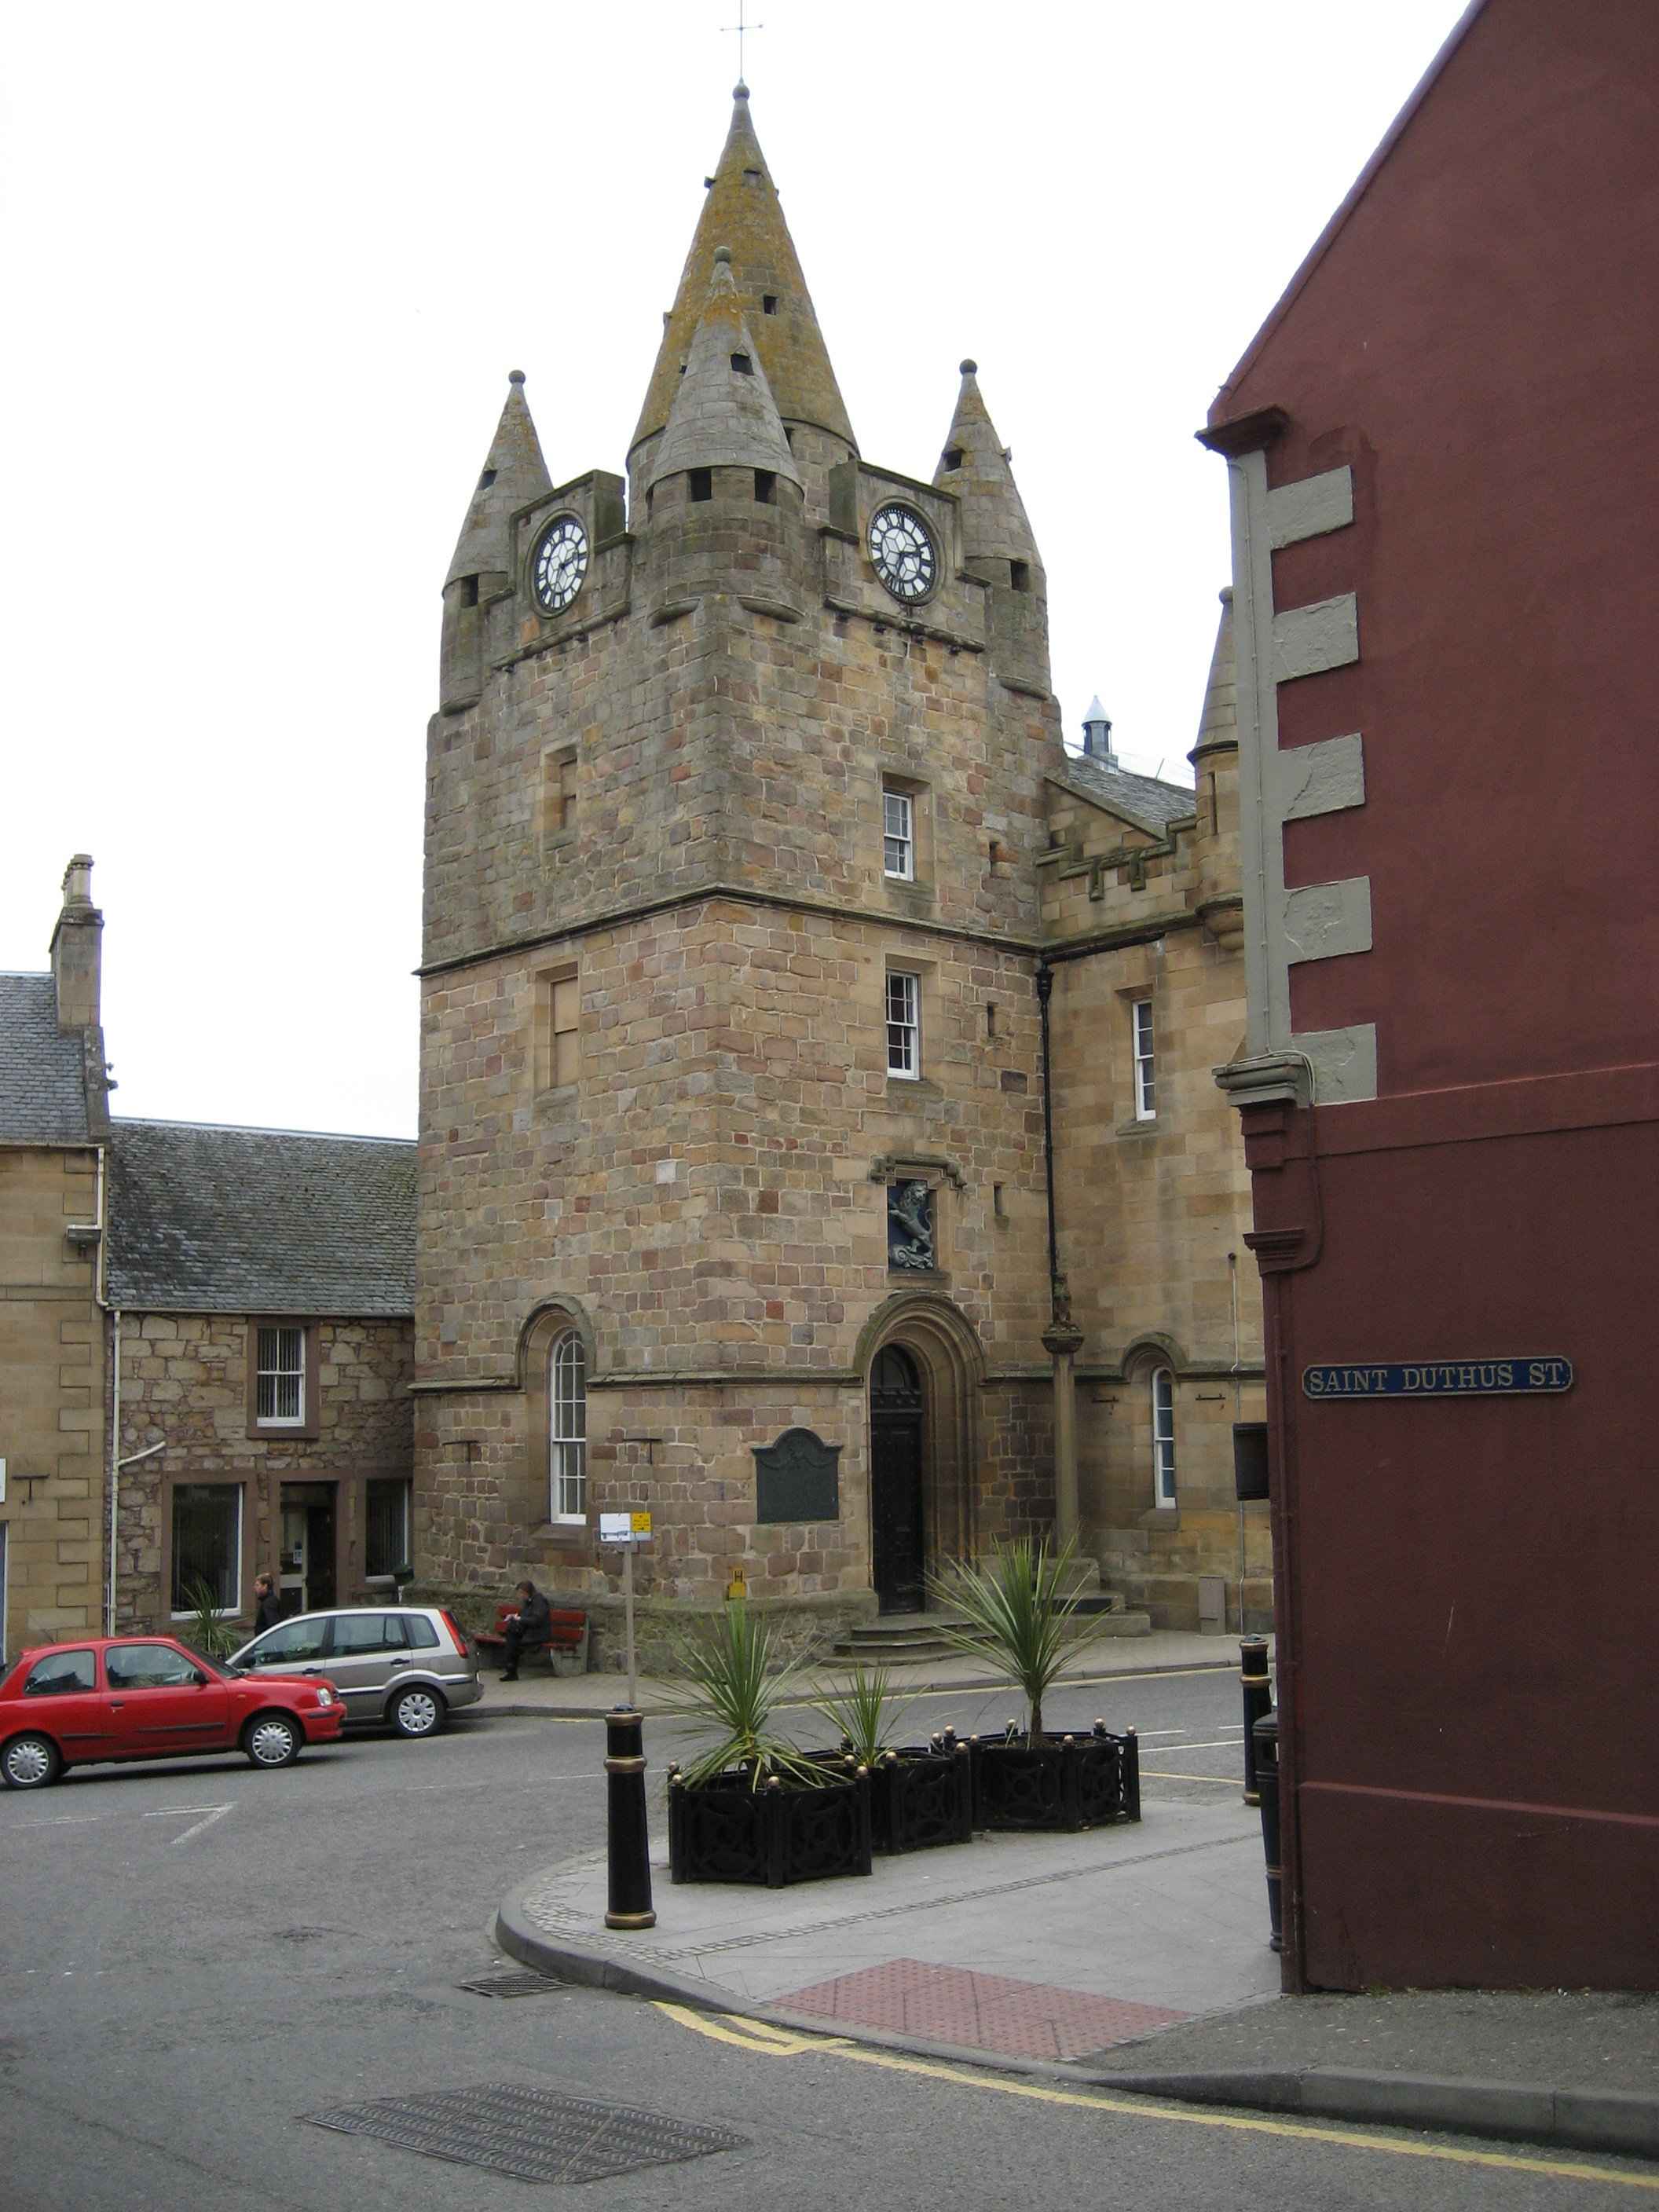 Tain tolbooth